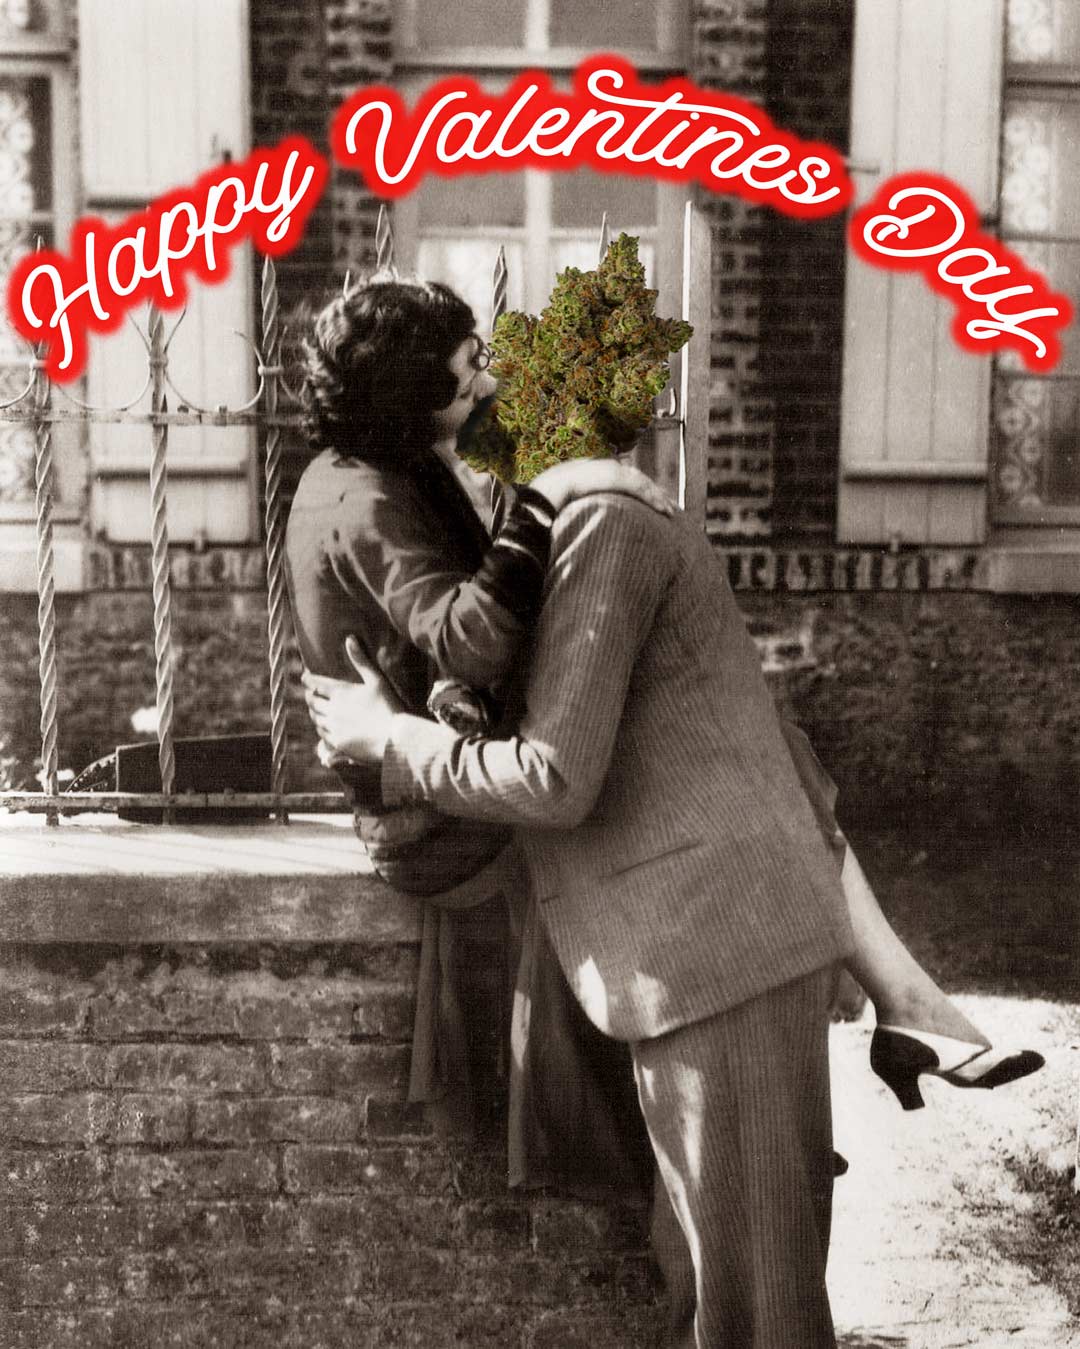 Happy valentines Day: Old Fashioned image of man kissing a women and man's head is a cannabis flower bud